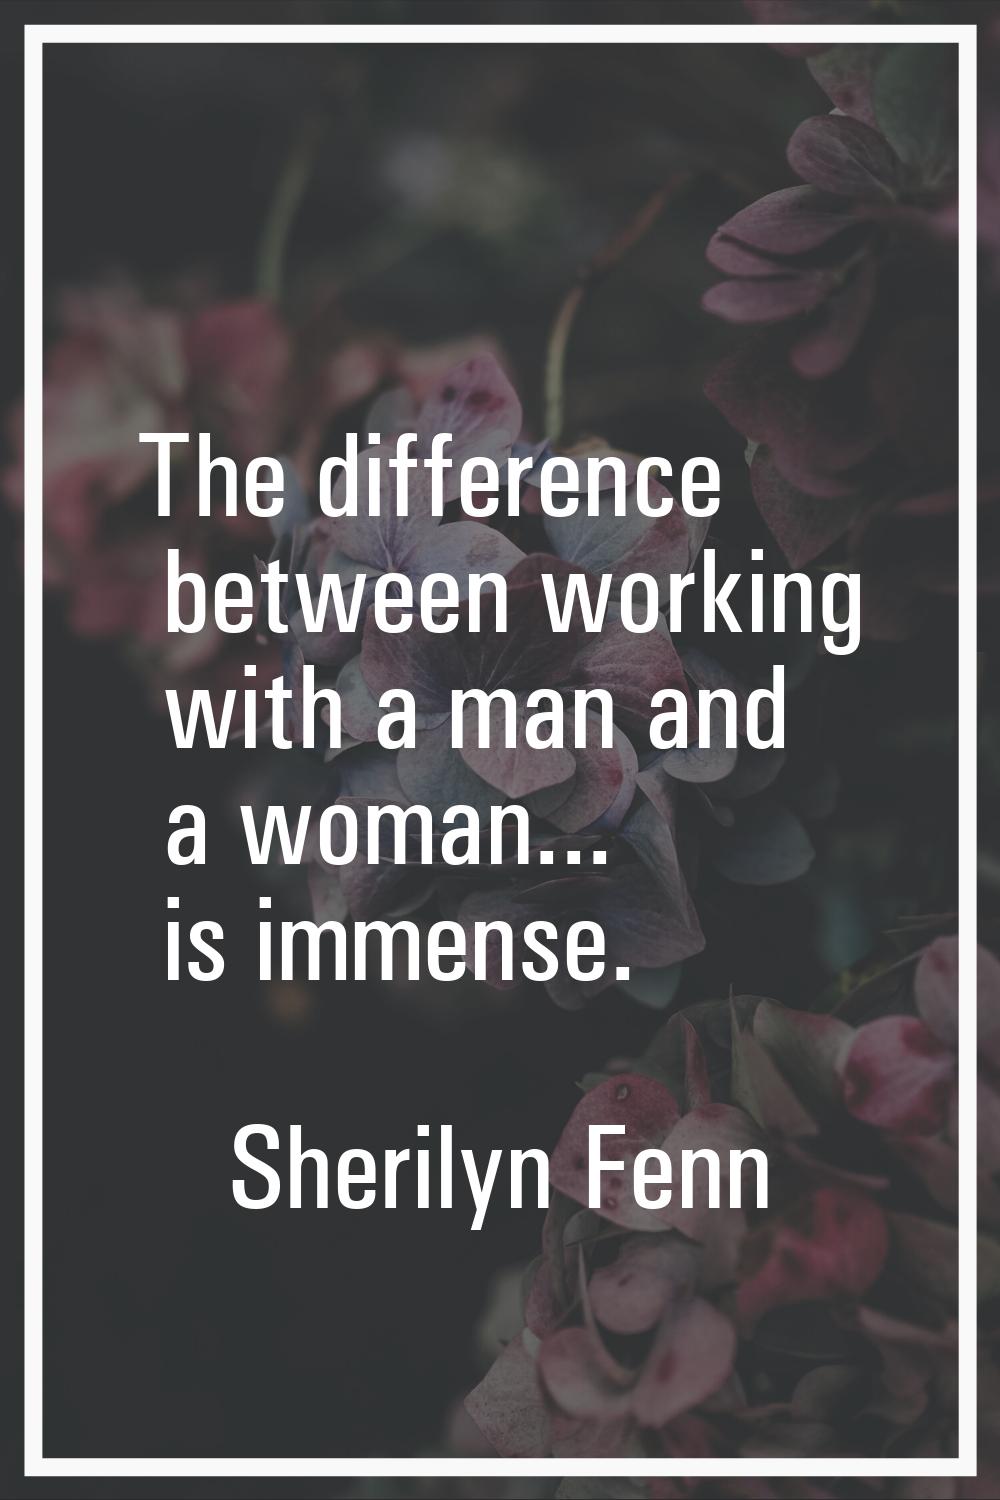 The difference between working with a man and a woman... is immense.